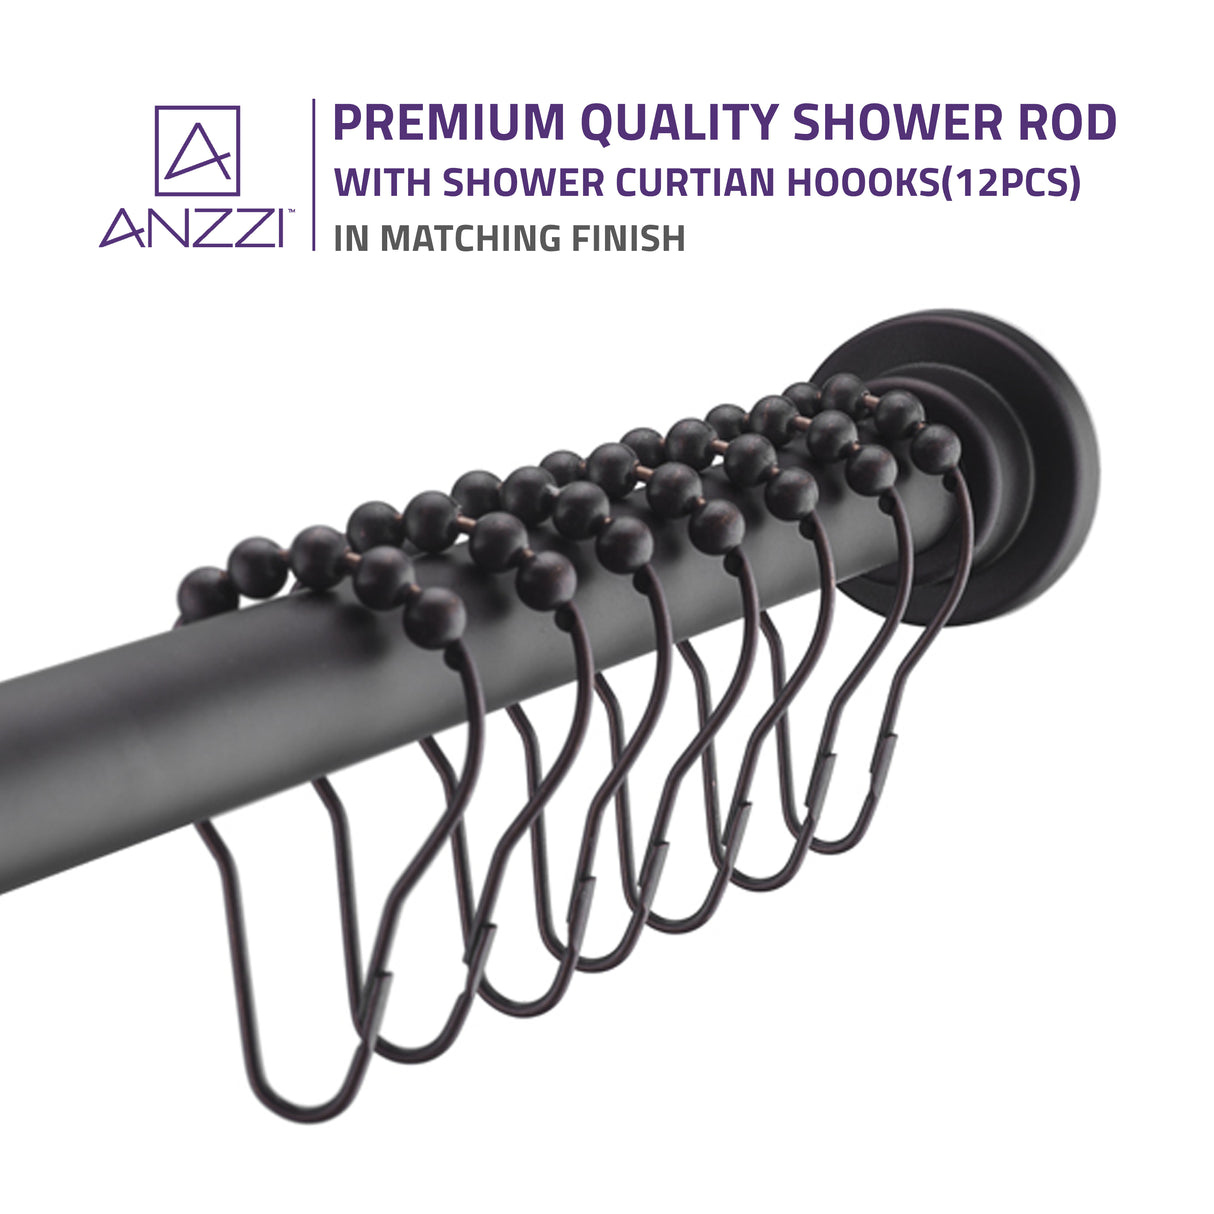 ANZZI AC-AZSR55ORB 35-55 Inches Shower Curtain Rod with Shower Hooks in Oil Rubbed Bronze | Adjustable Tension Shower Doorway Curtain Rod | Rust Resistant No Drilling Anti-Slip Bar for Bathroom | AC-AZSR55ORB